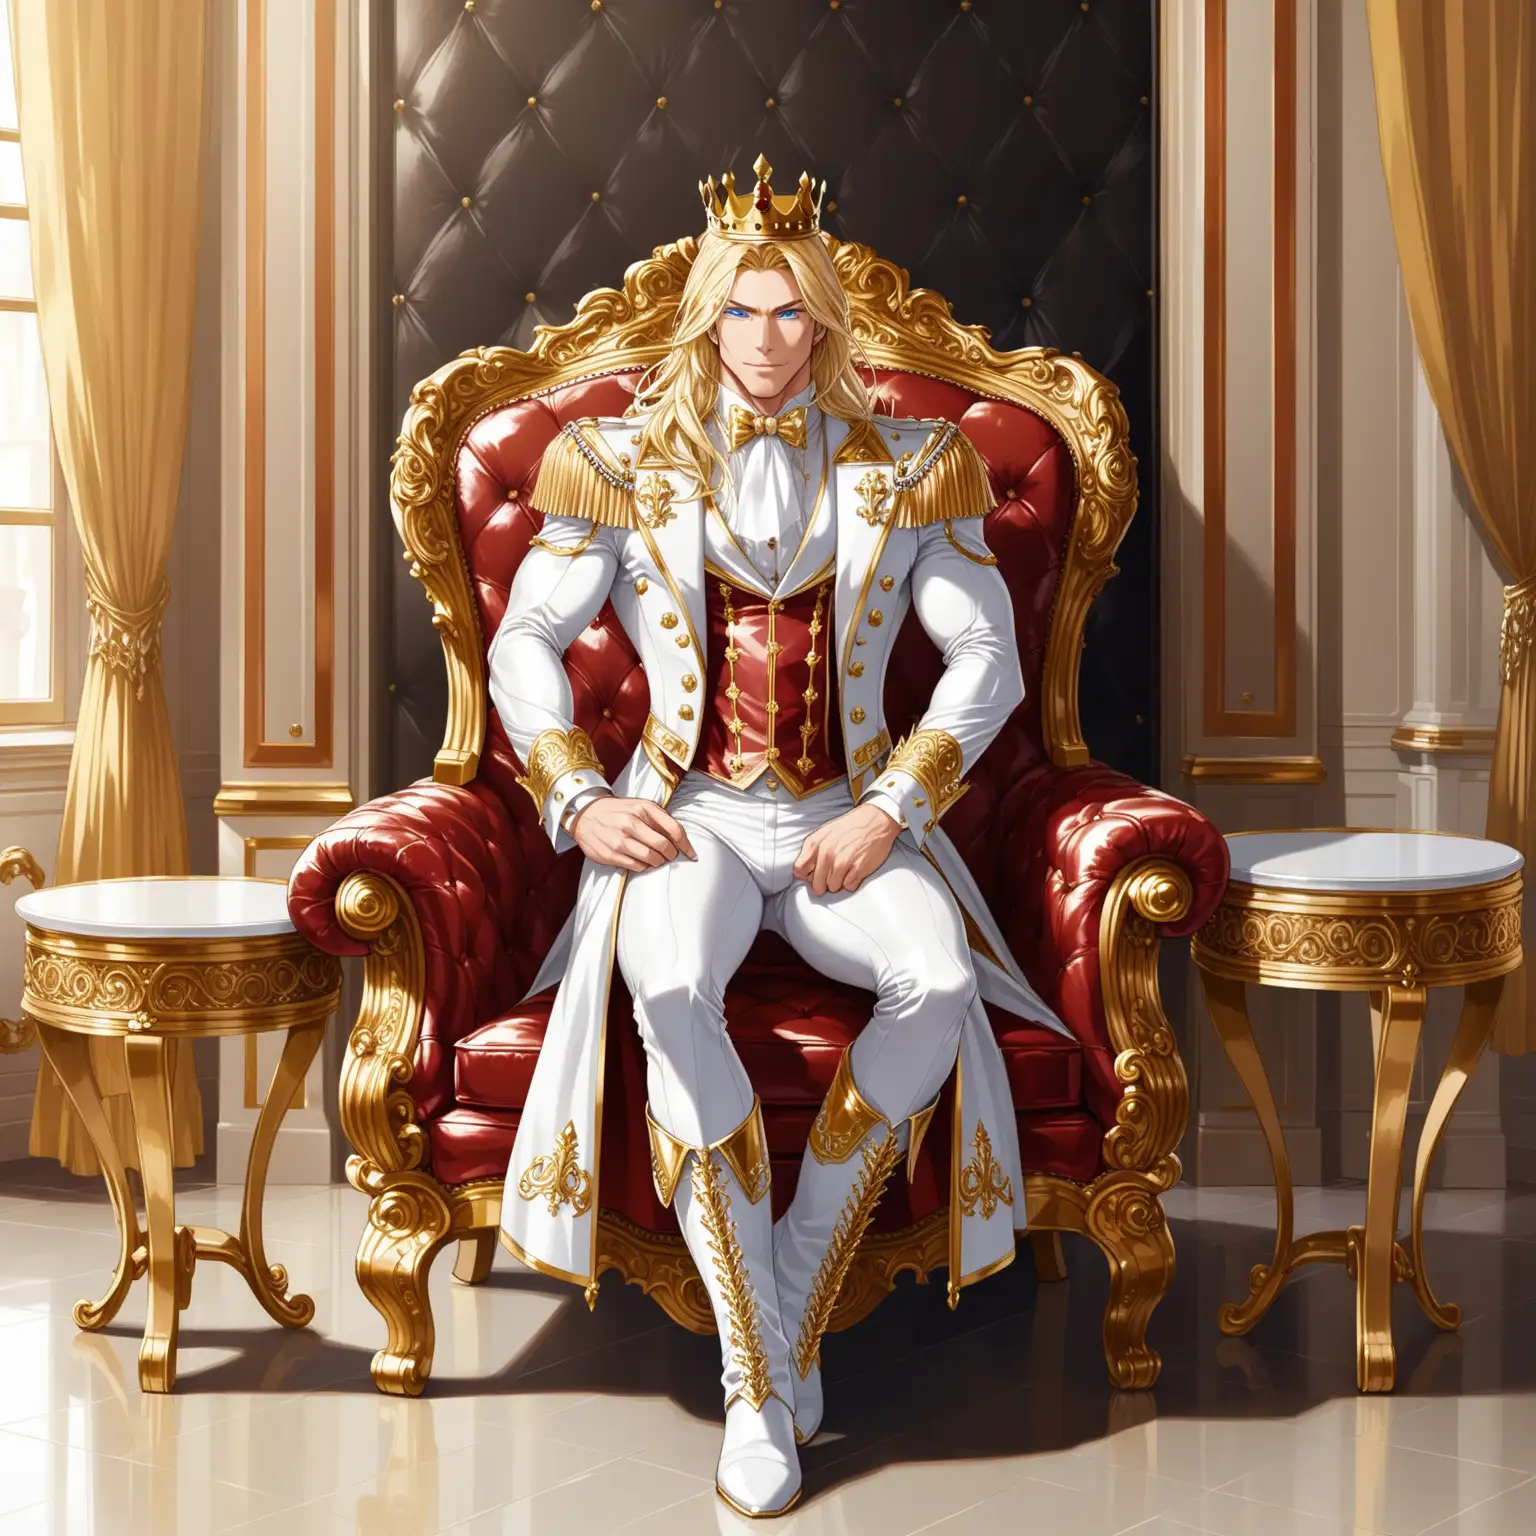 1 man. He is a king. He is handsome and muscular. He has very long straight gold hair and light blue eyes. He is wearing a shiny white latex Victorian suit with gold accents, royal crown, royal cape, coat, vest and puff tie, tight pants and knee high side buckle boots. He has a kind expression. He is in a royal palace with white leather furniture with gold accents.